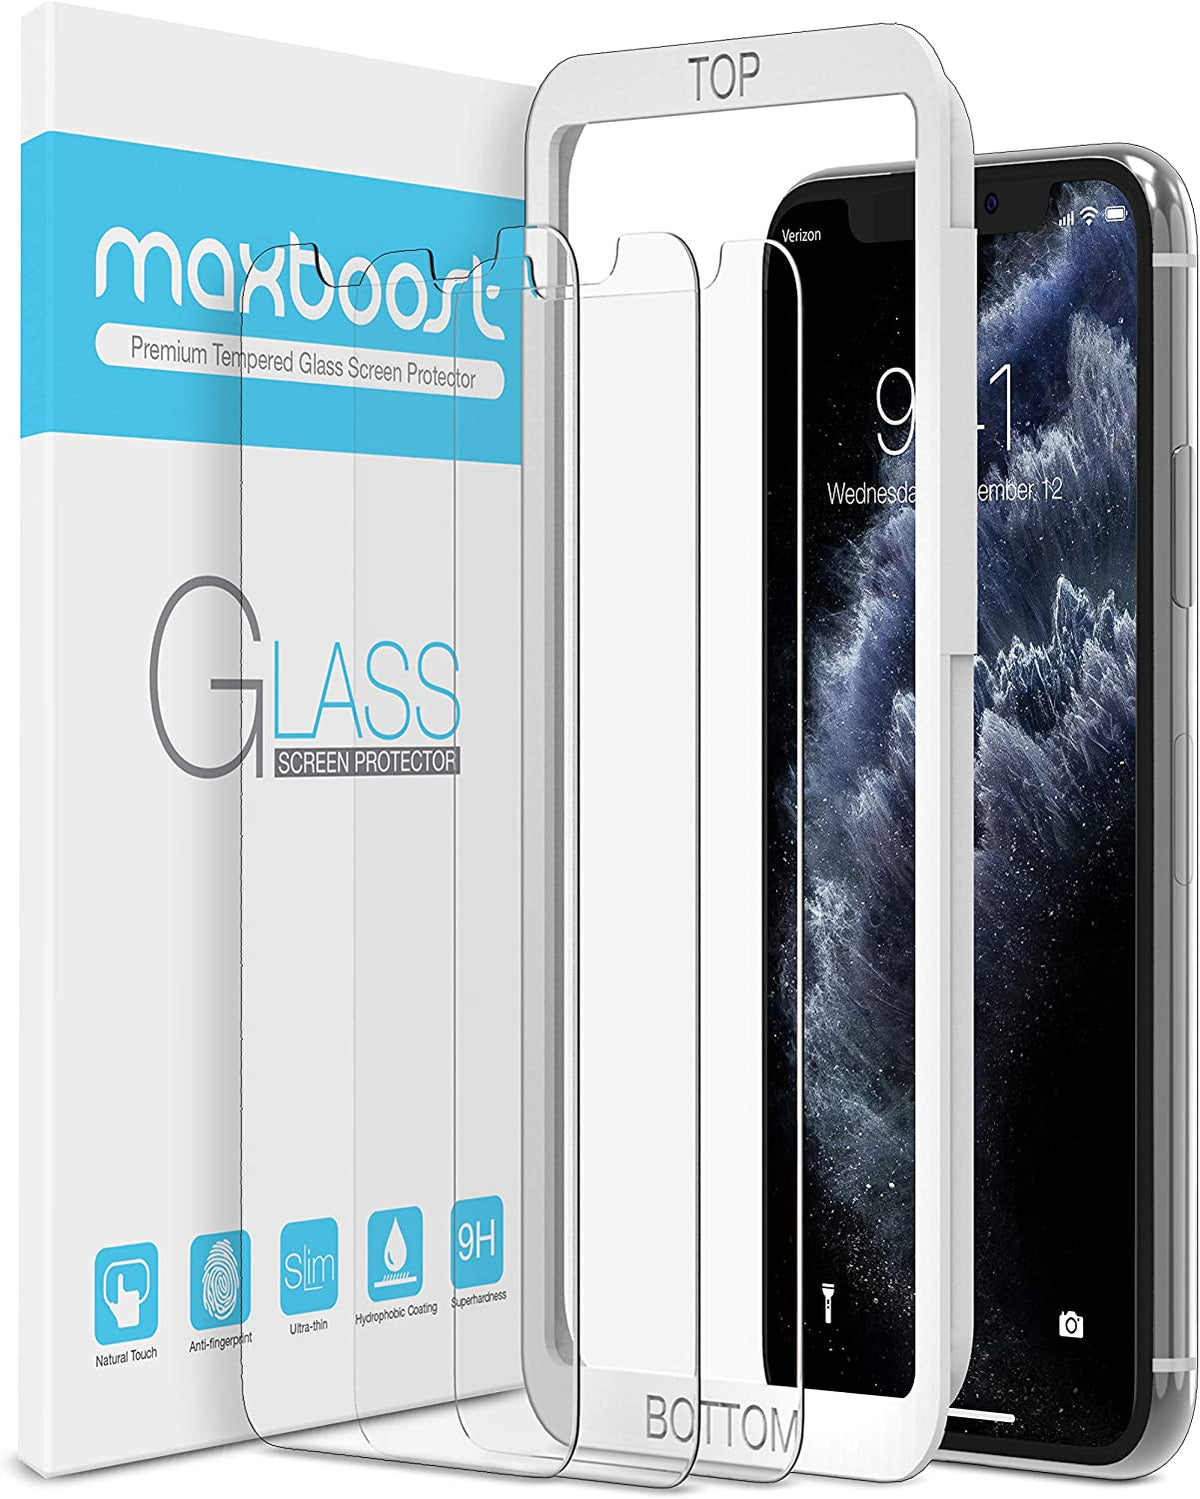 Maxboost Screen Protector for Apple iPhone 11 Pro Max and iPhone Xs Max (6.5") (3 Pack, Clear)